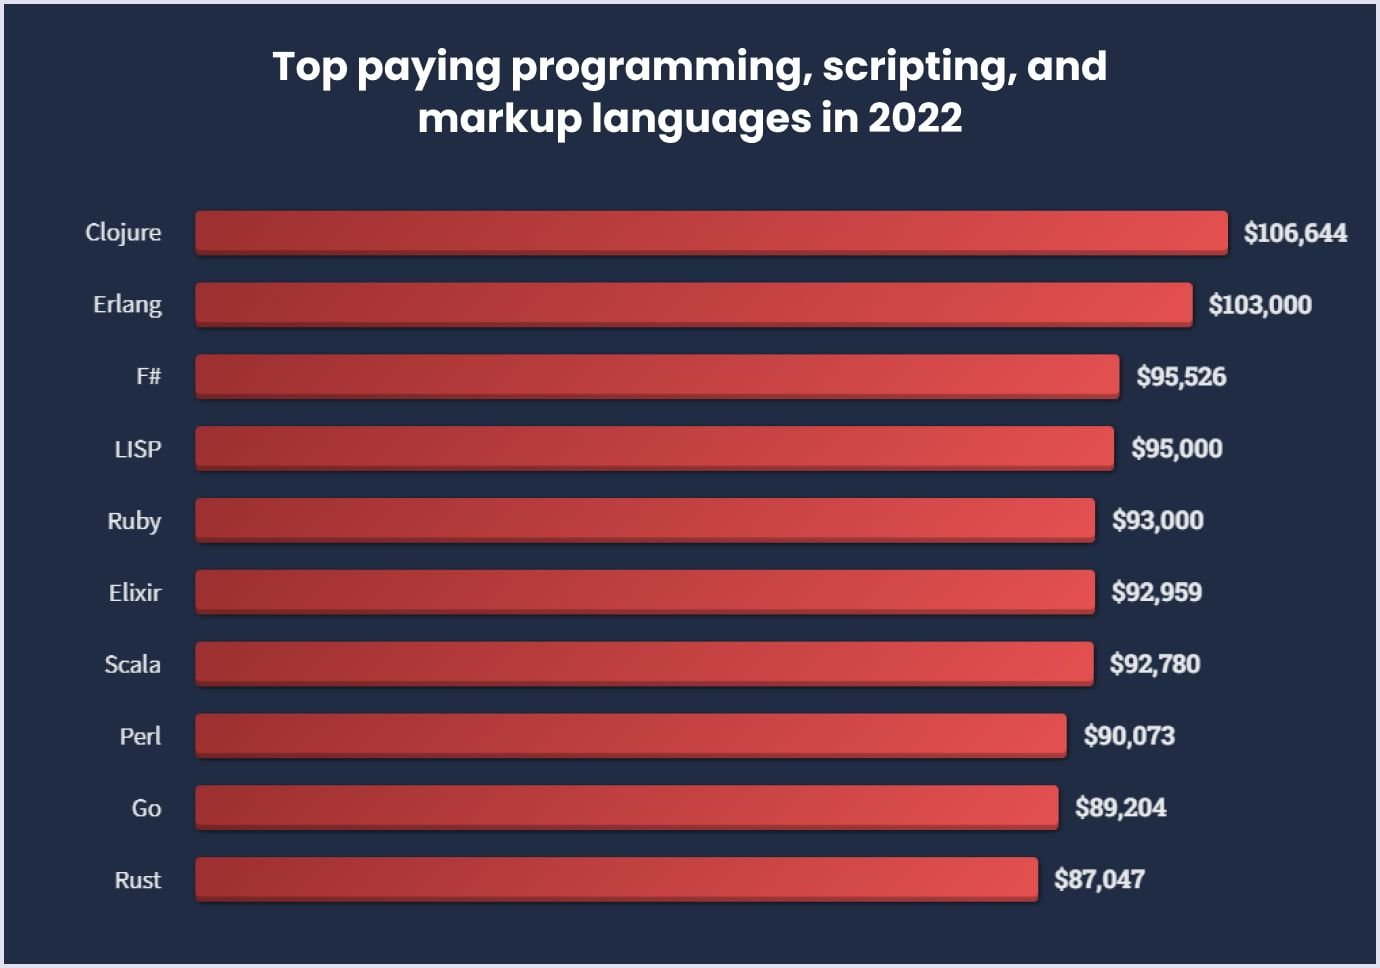 Top paying programming, scripting, and markup languages by Stack Overflow